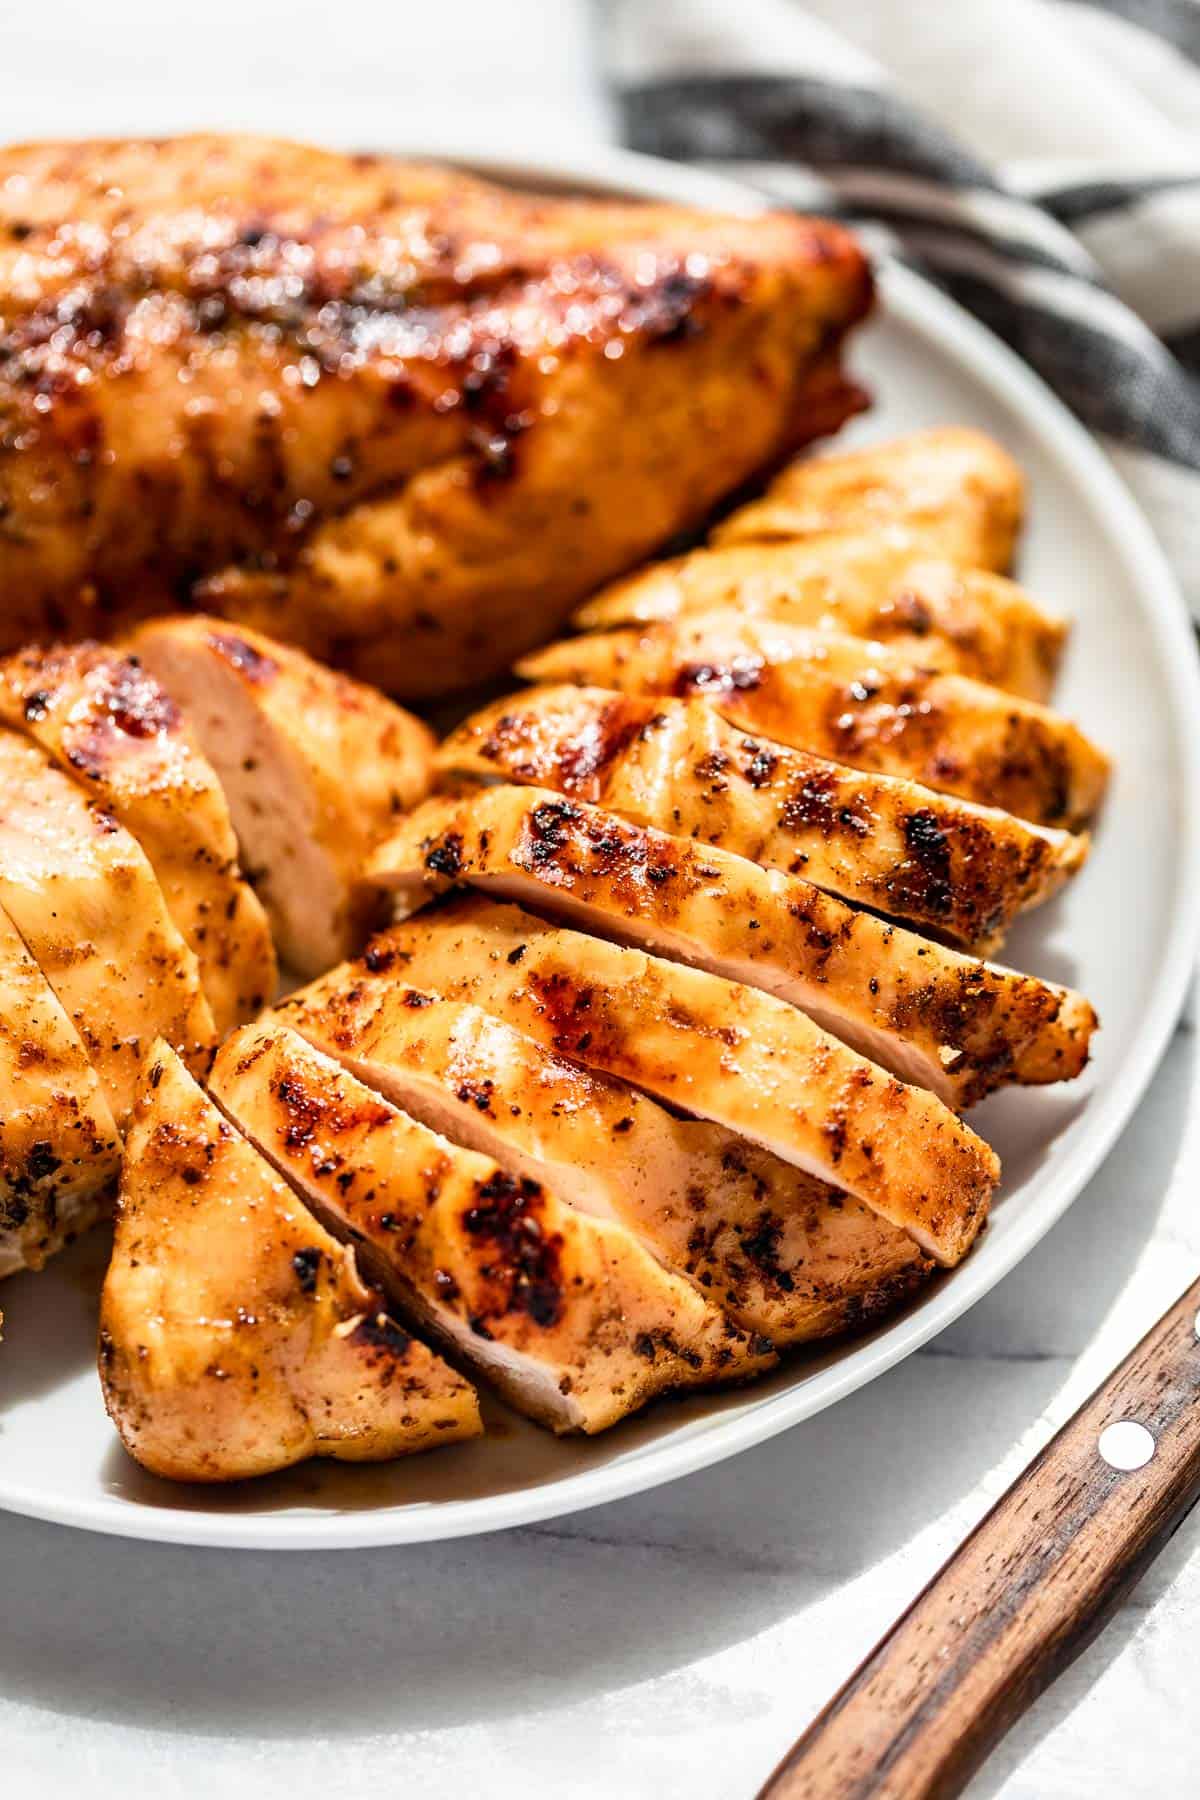 Sliced smoked chicken breasts on a white plate.